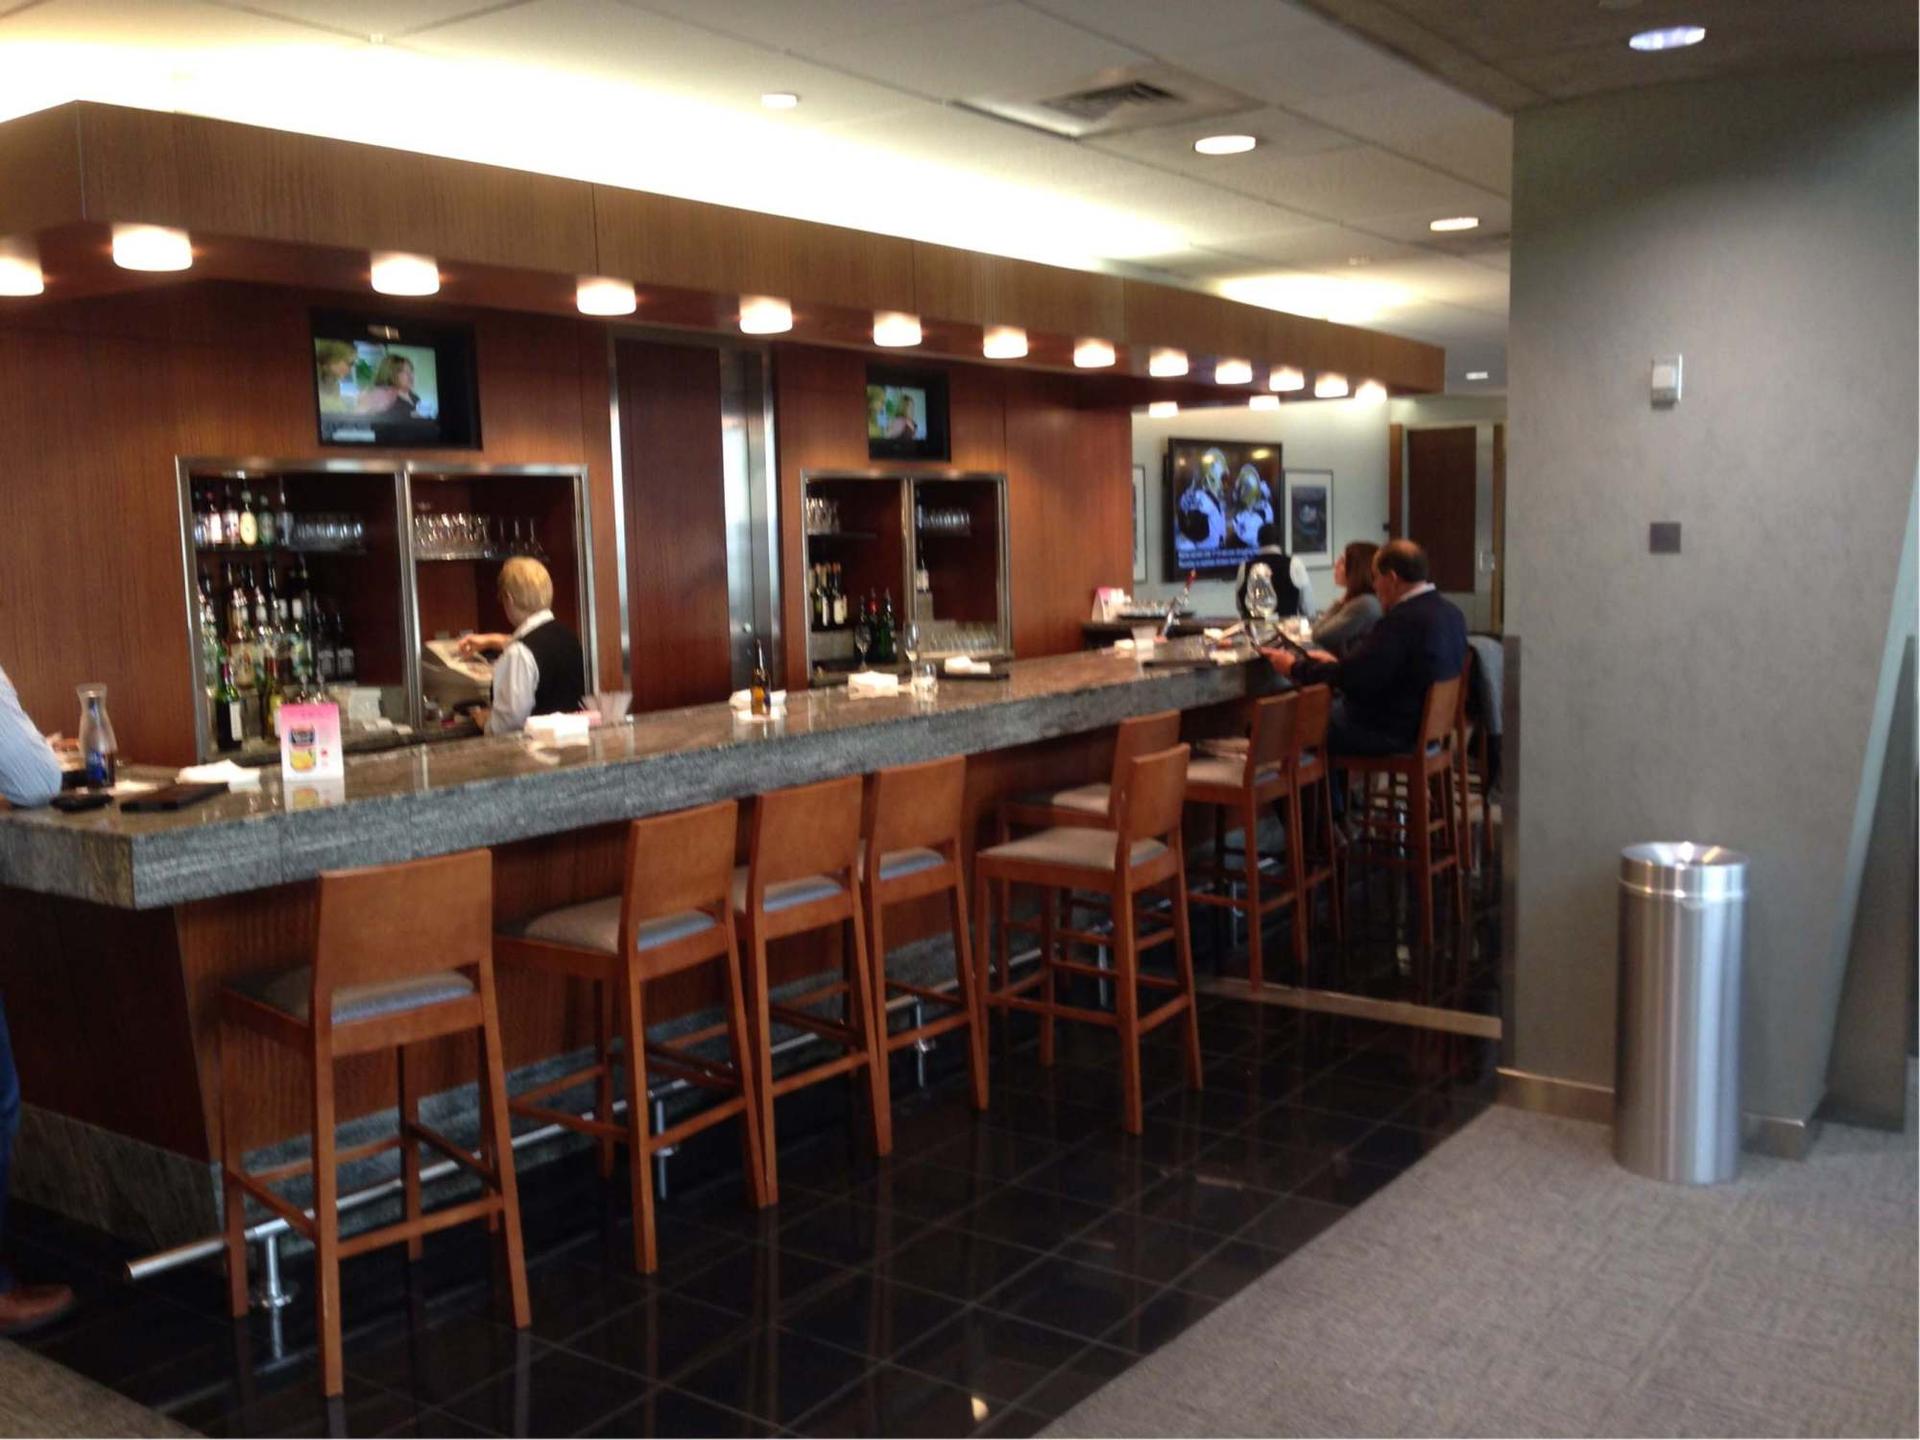 American Airlines Admirals Club image 5 of 48